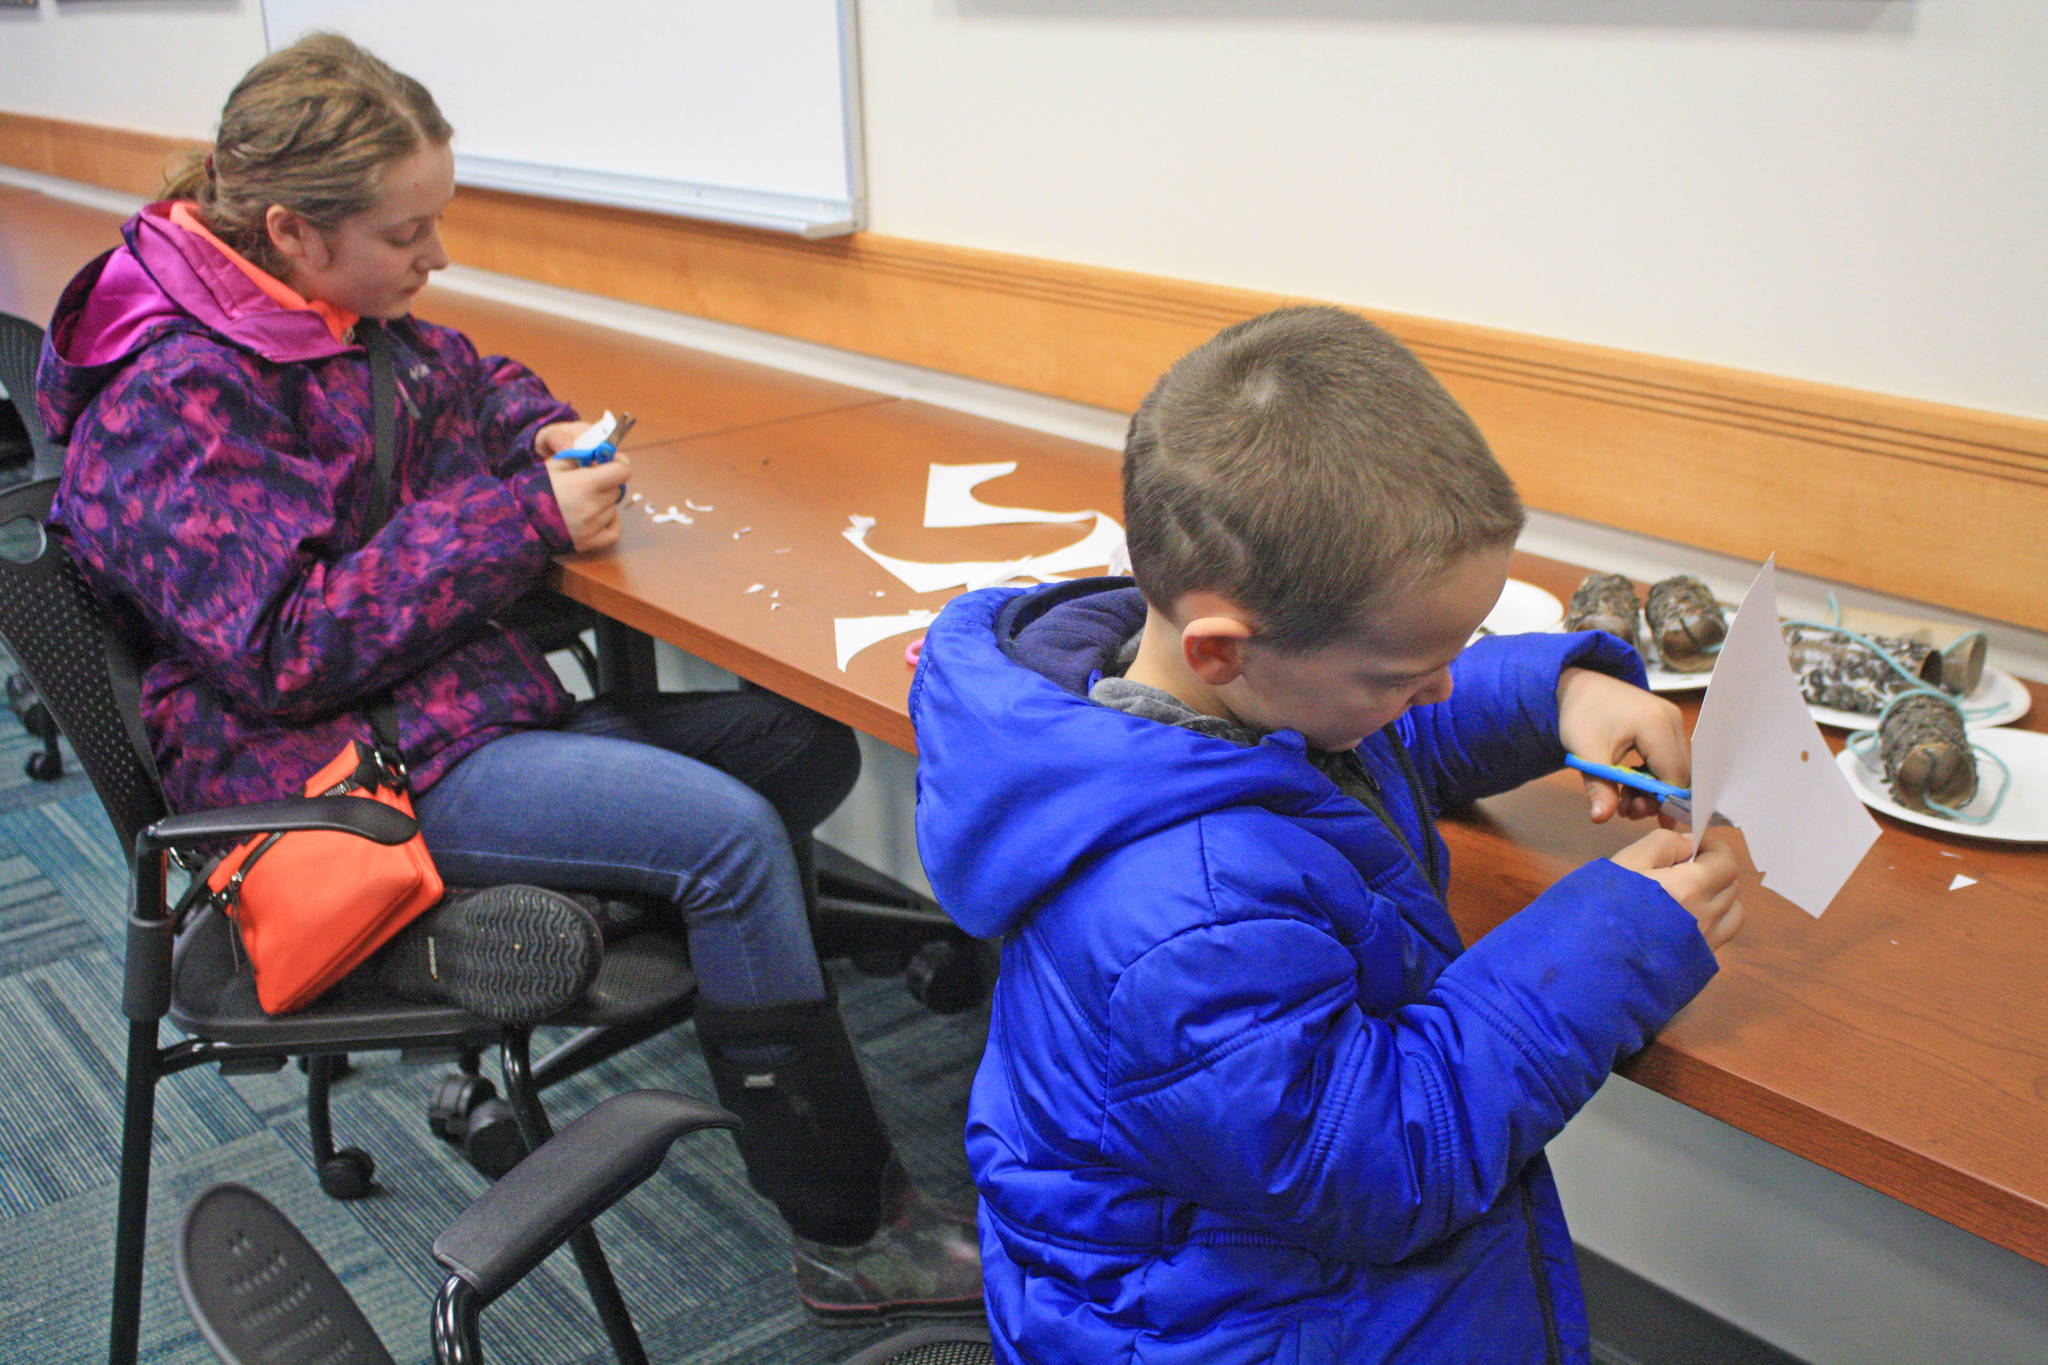 Audrey Larson, 13, and Phillip Larson, 6, create paper snowflakes at the Kenai National Wildlife Refuge Visitor Center Winter Break Family Fun Day on Dec. 27. The event is just one of the many activities hosted year-round by the center. (Photo by Erin Thompson/Peninsula Clarion)